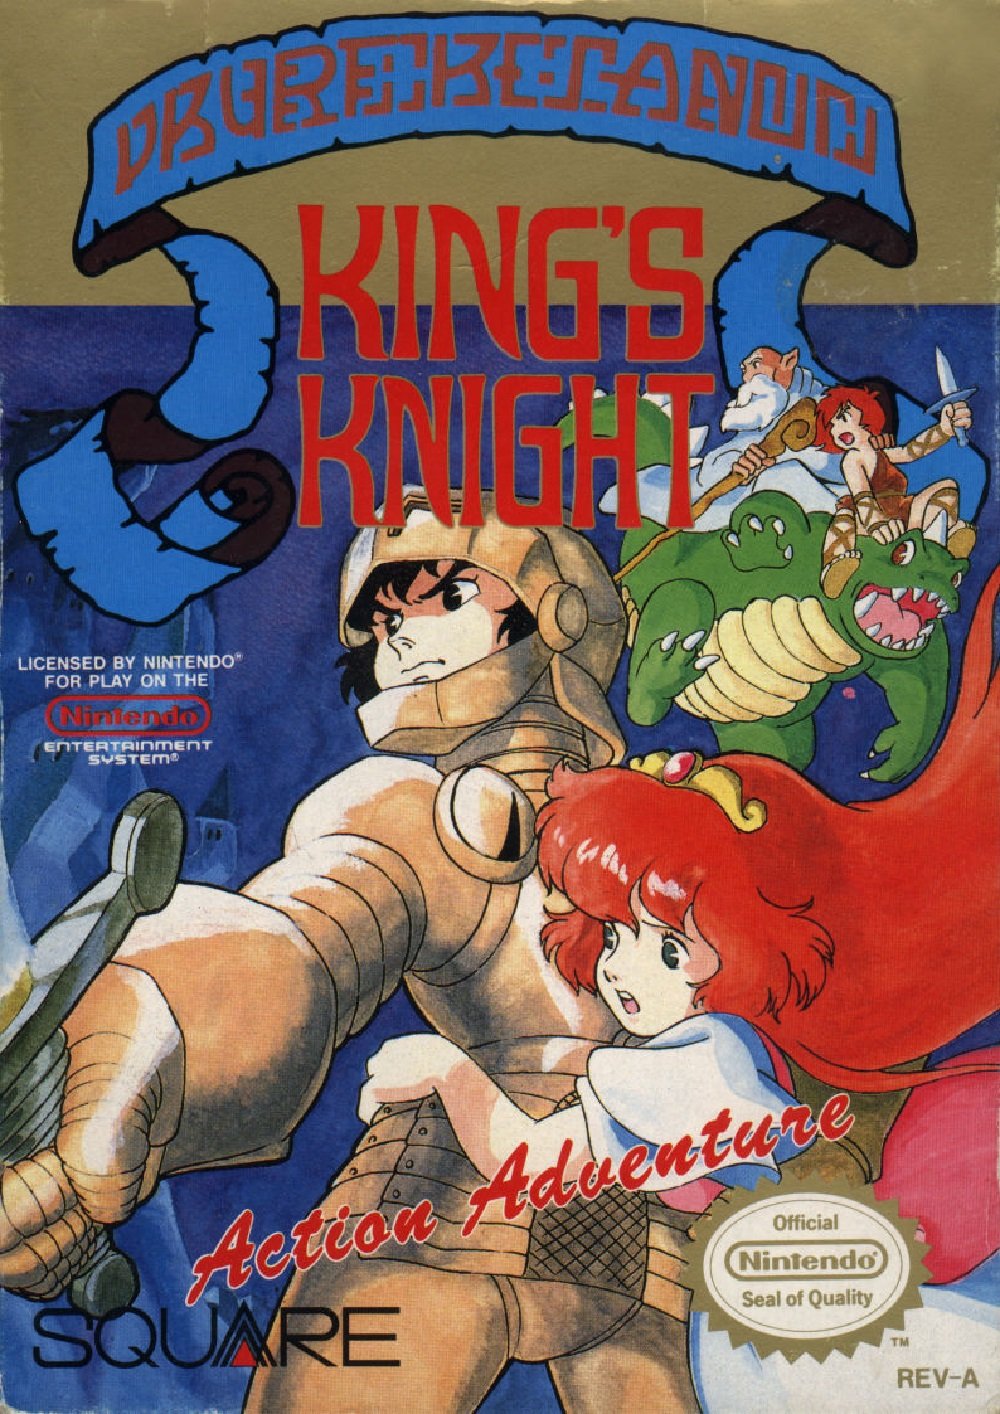 Image of King's Knight